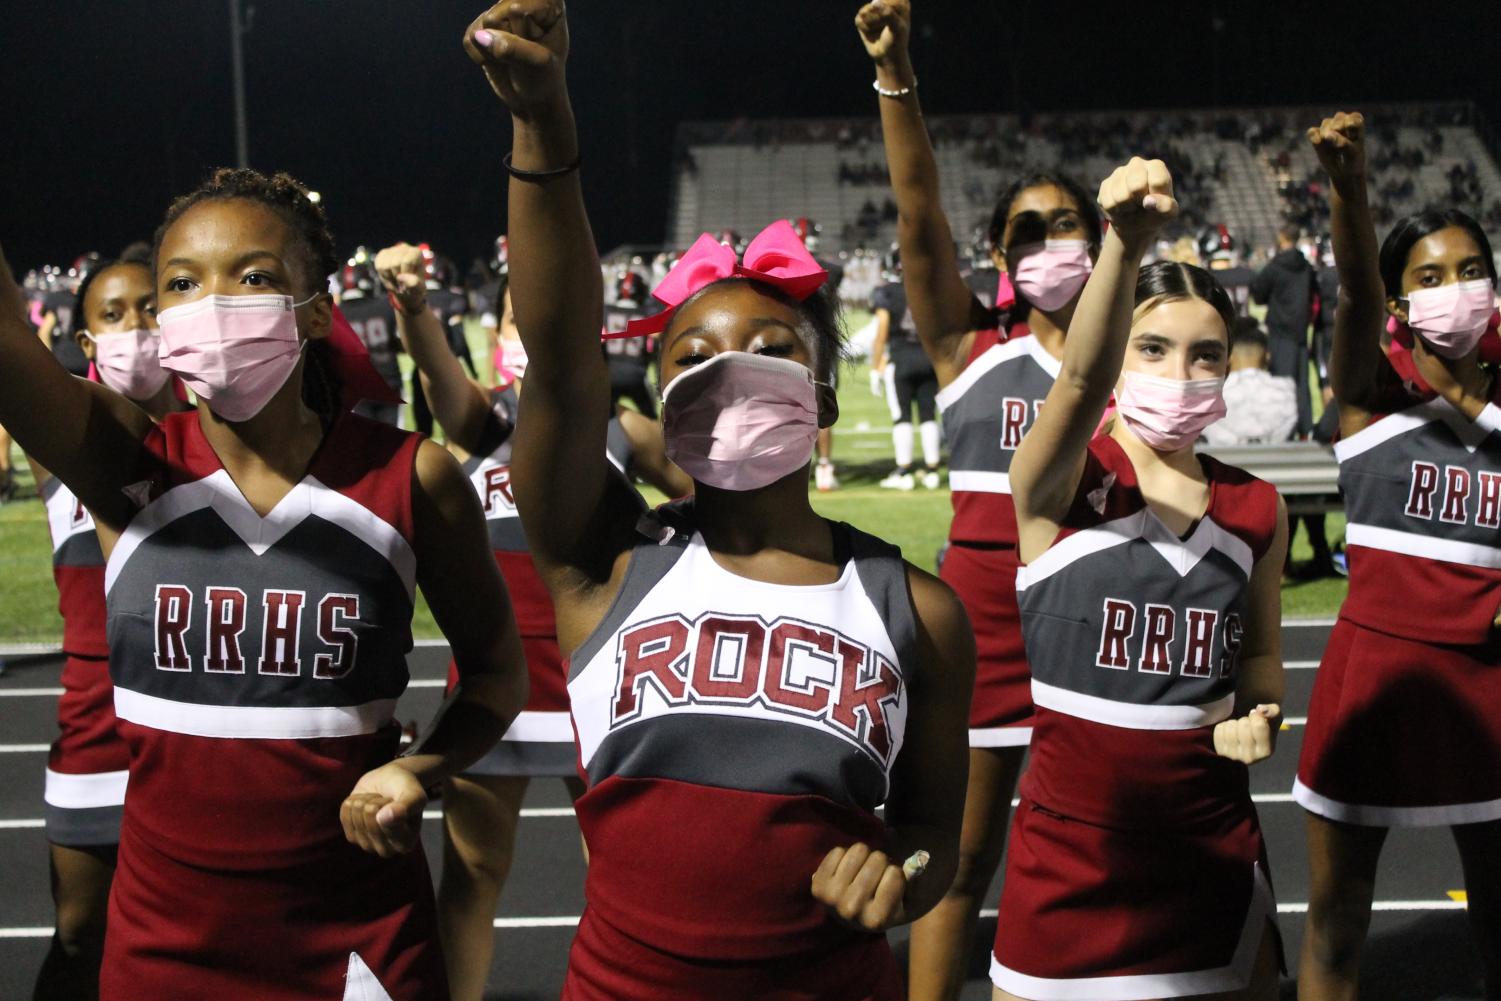 Phoenix cheerleaders lead the “go go, fight fight” chant in front of the student section to bring hype up the fans at the Pink Out game on Oct. 15. Freshman Jaden Thomas, sophomore Caitlynn Washington, and freshman Abby Welch stand in the front to lead the chant. The cheerleaders had pink bows in their hair for the pink out game.